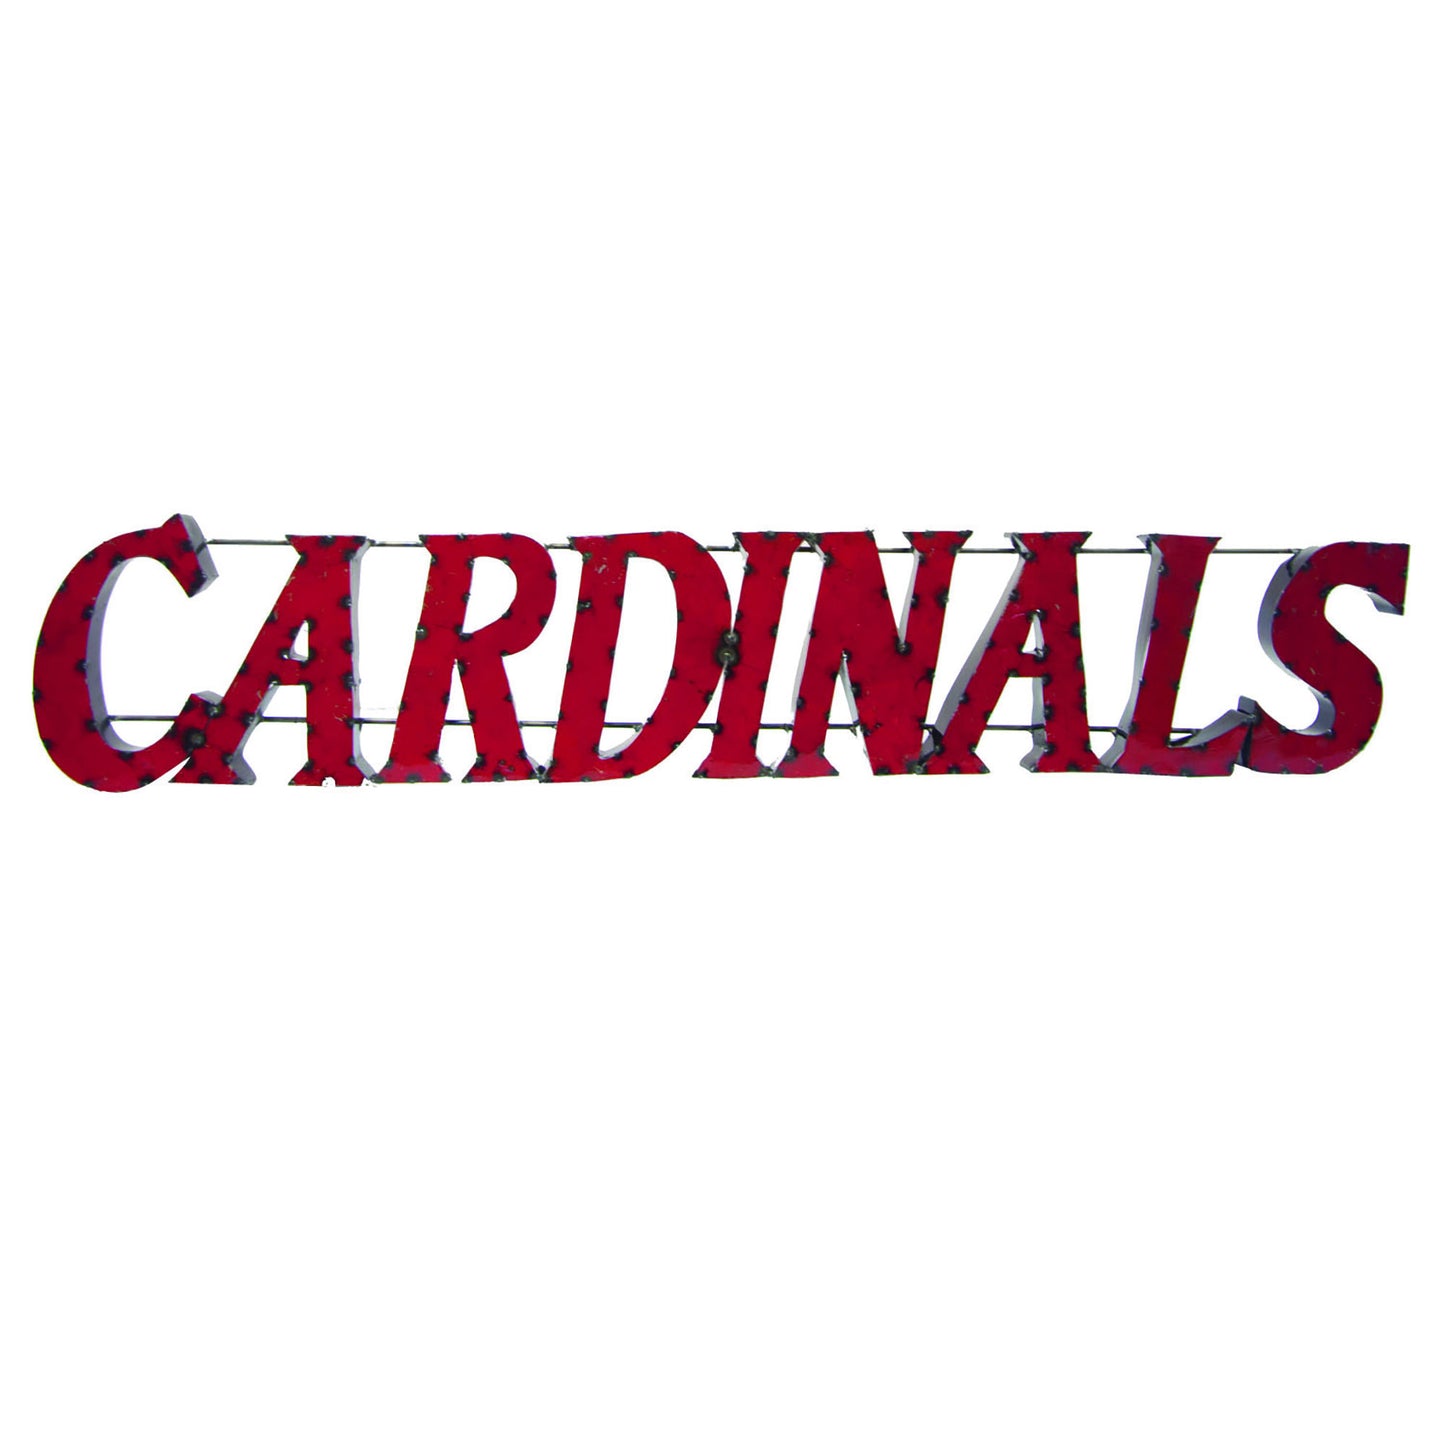 University of Louisville "Cardinals" Recycled Metal Wall Decor